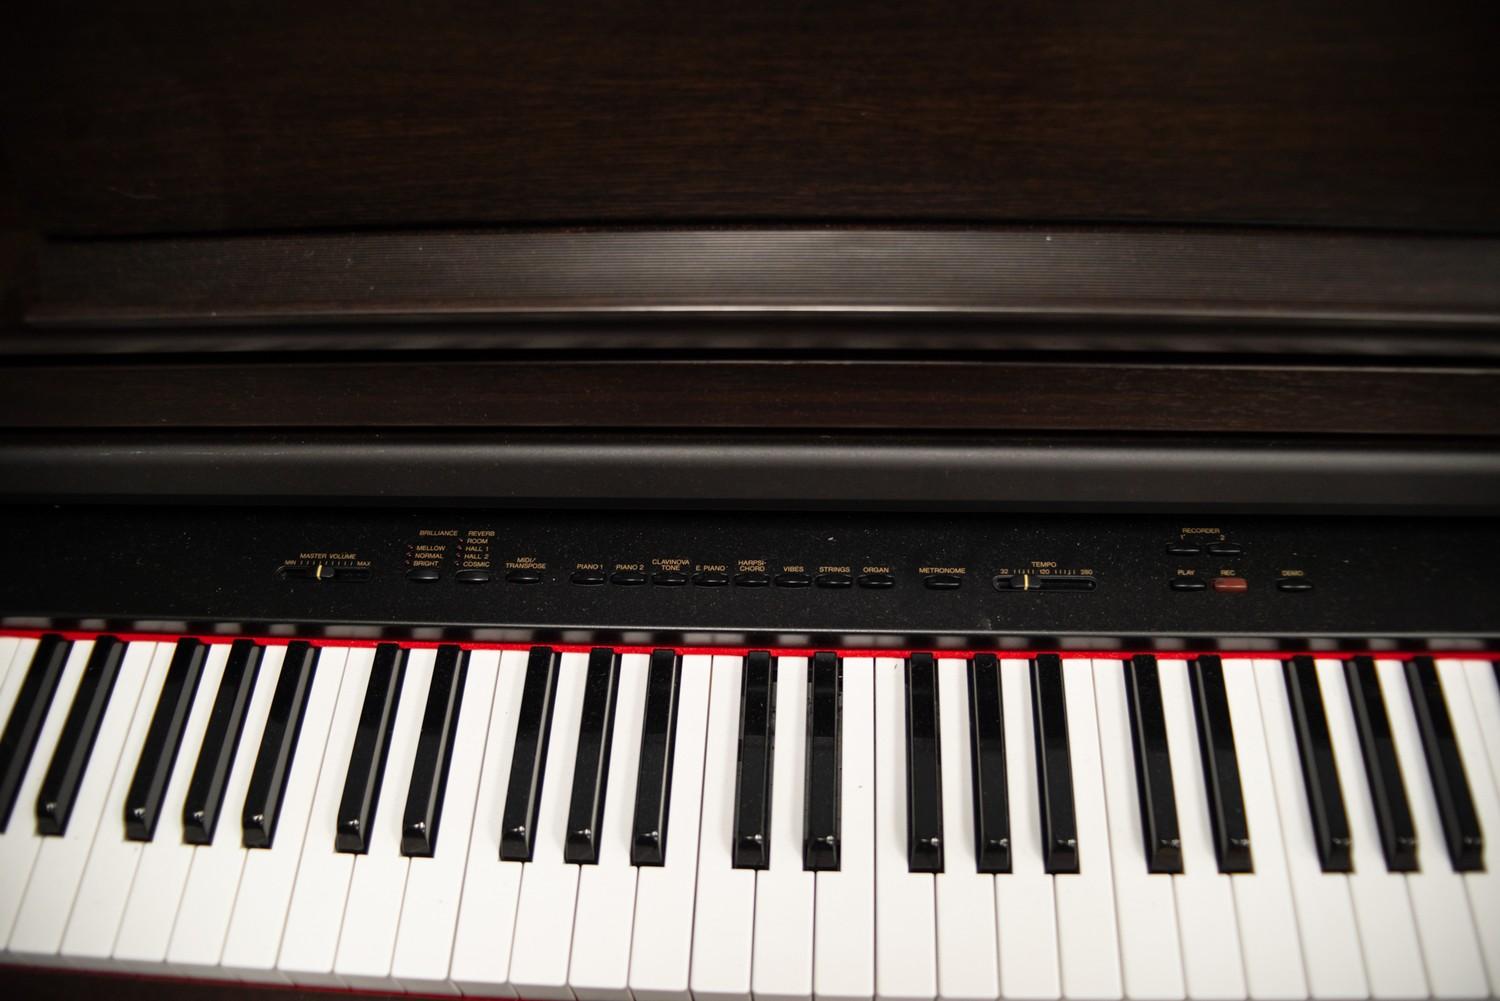 YAMAHA 'CLAVINOVA' SEVEN OCTAVE KEYBOARD, MODEL CLF-155 STEREO WITH METRONOME AND REVERB MULTI-MID - Image 5 of 7